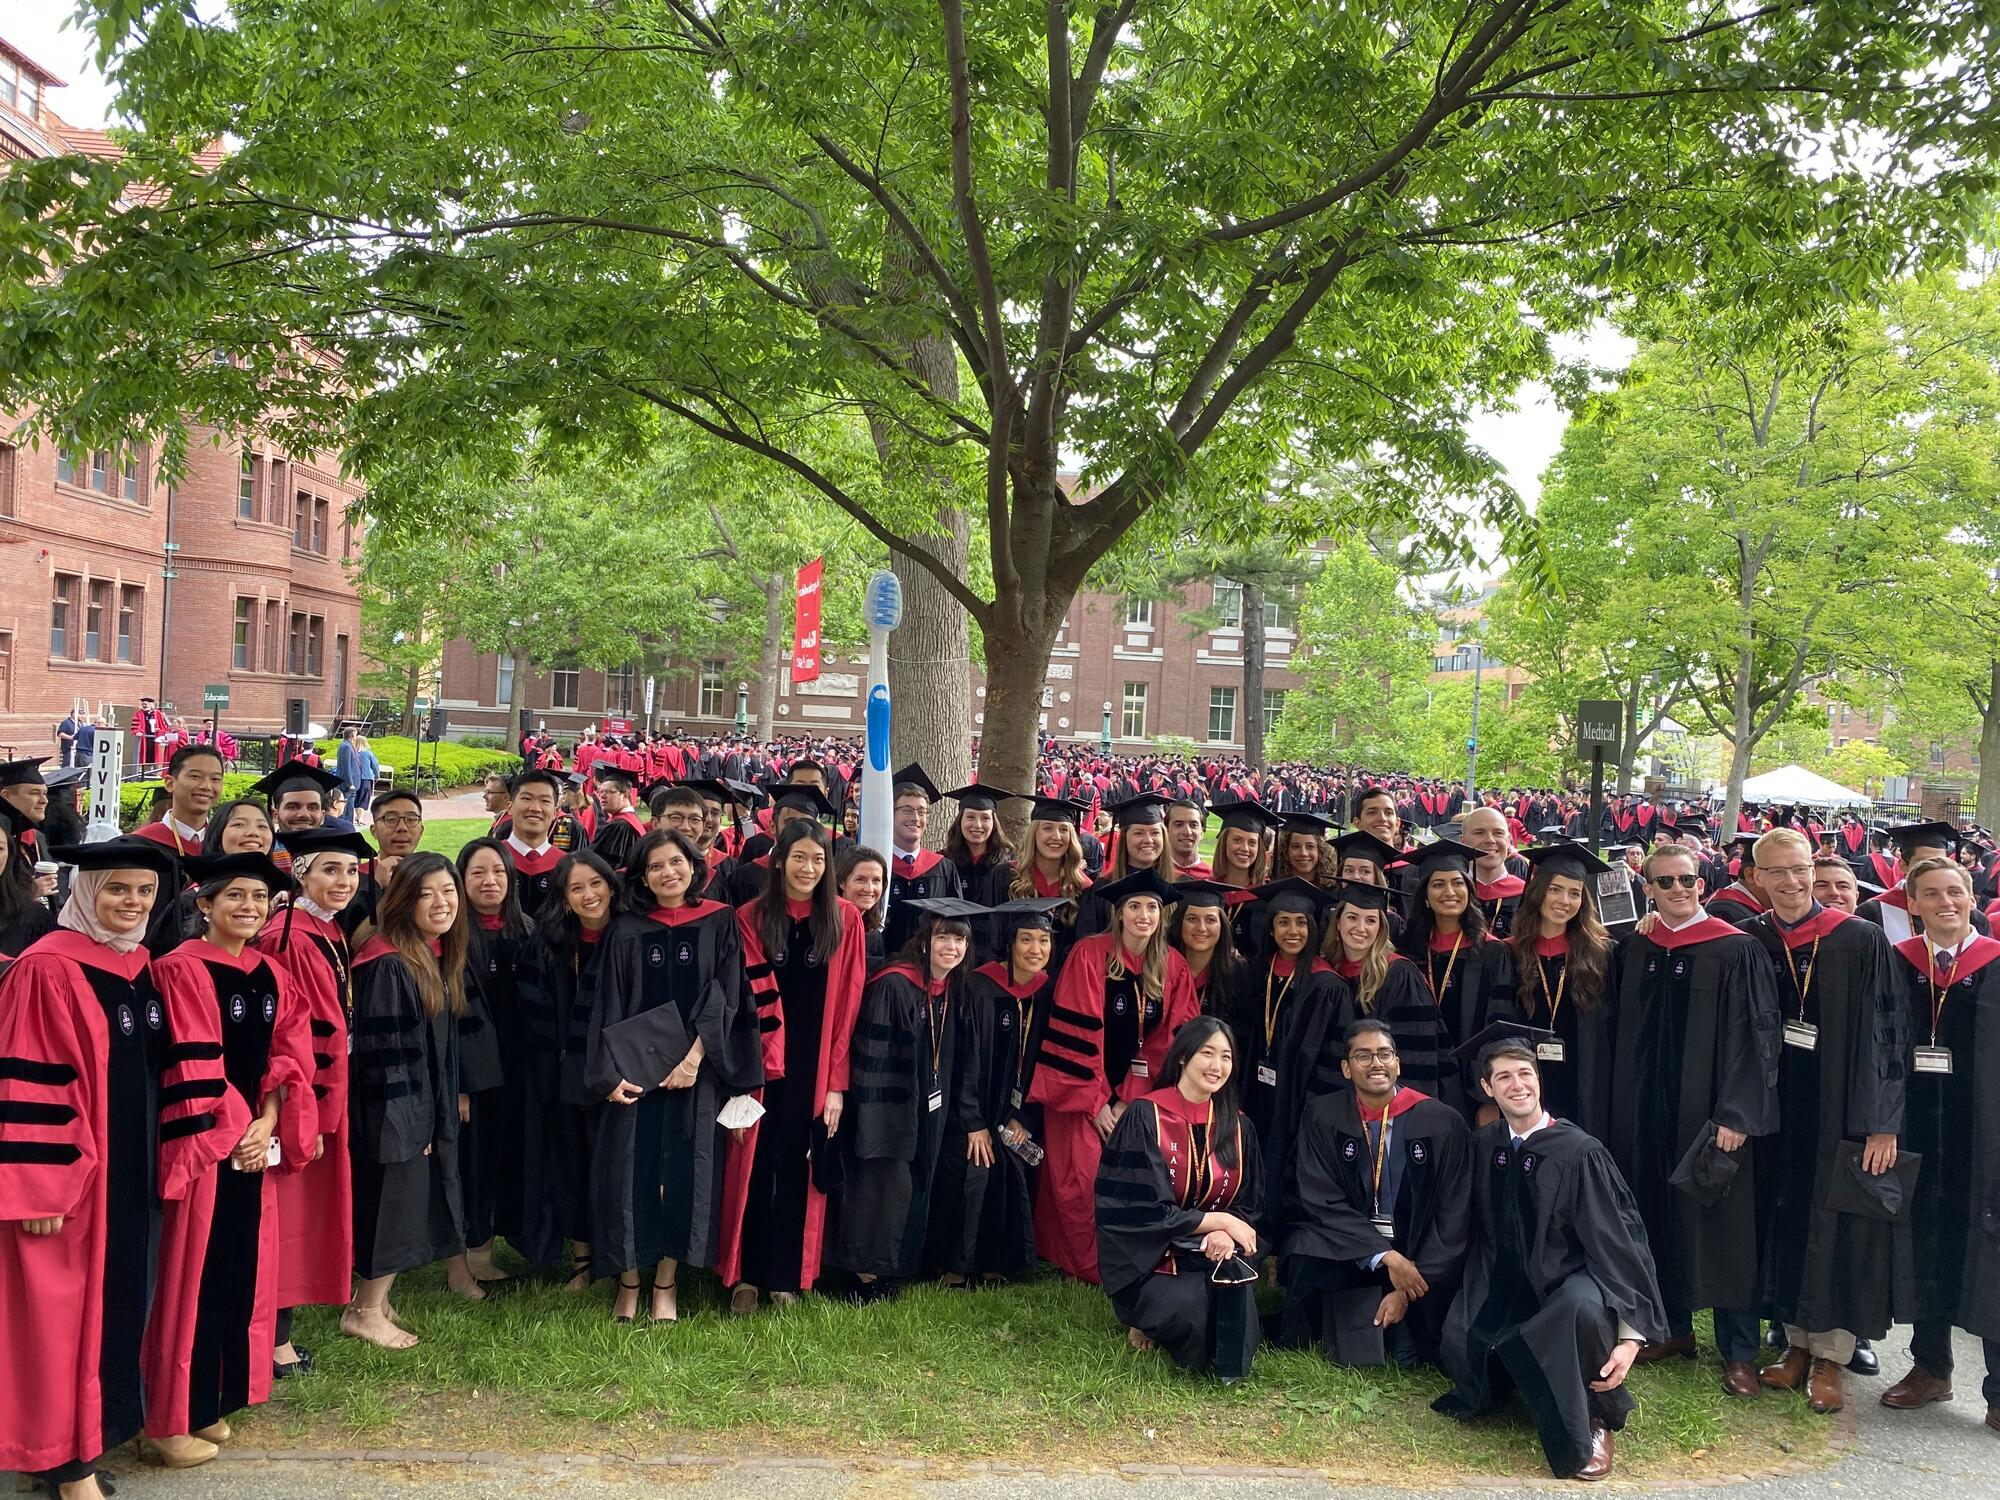 Group of students standing together outside wearing regalia